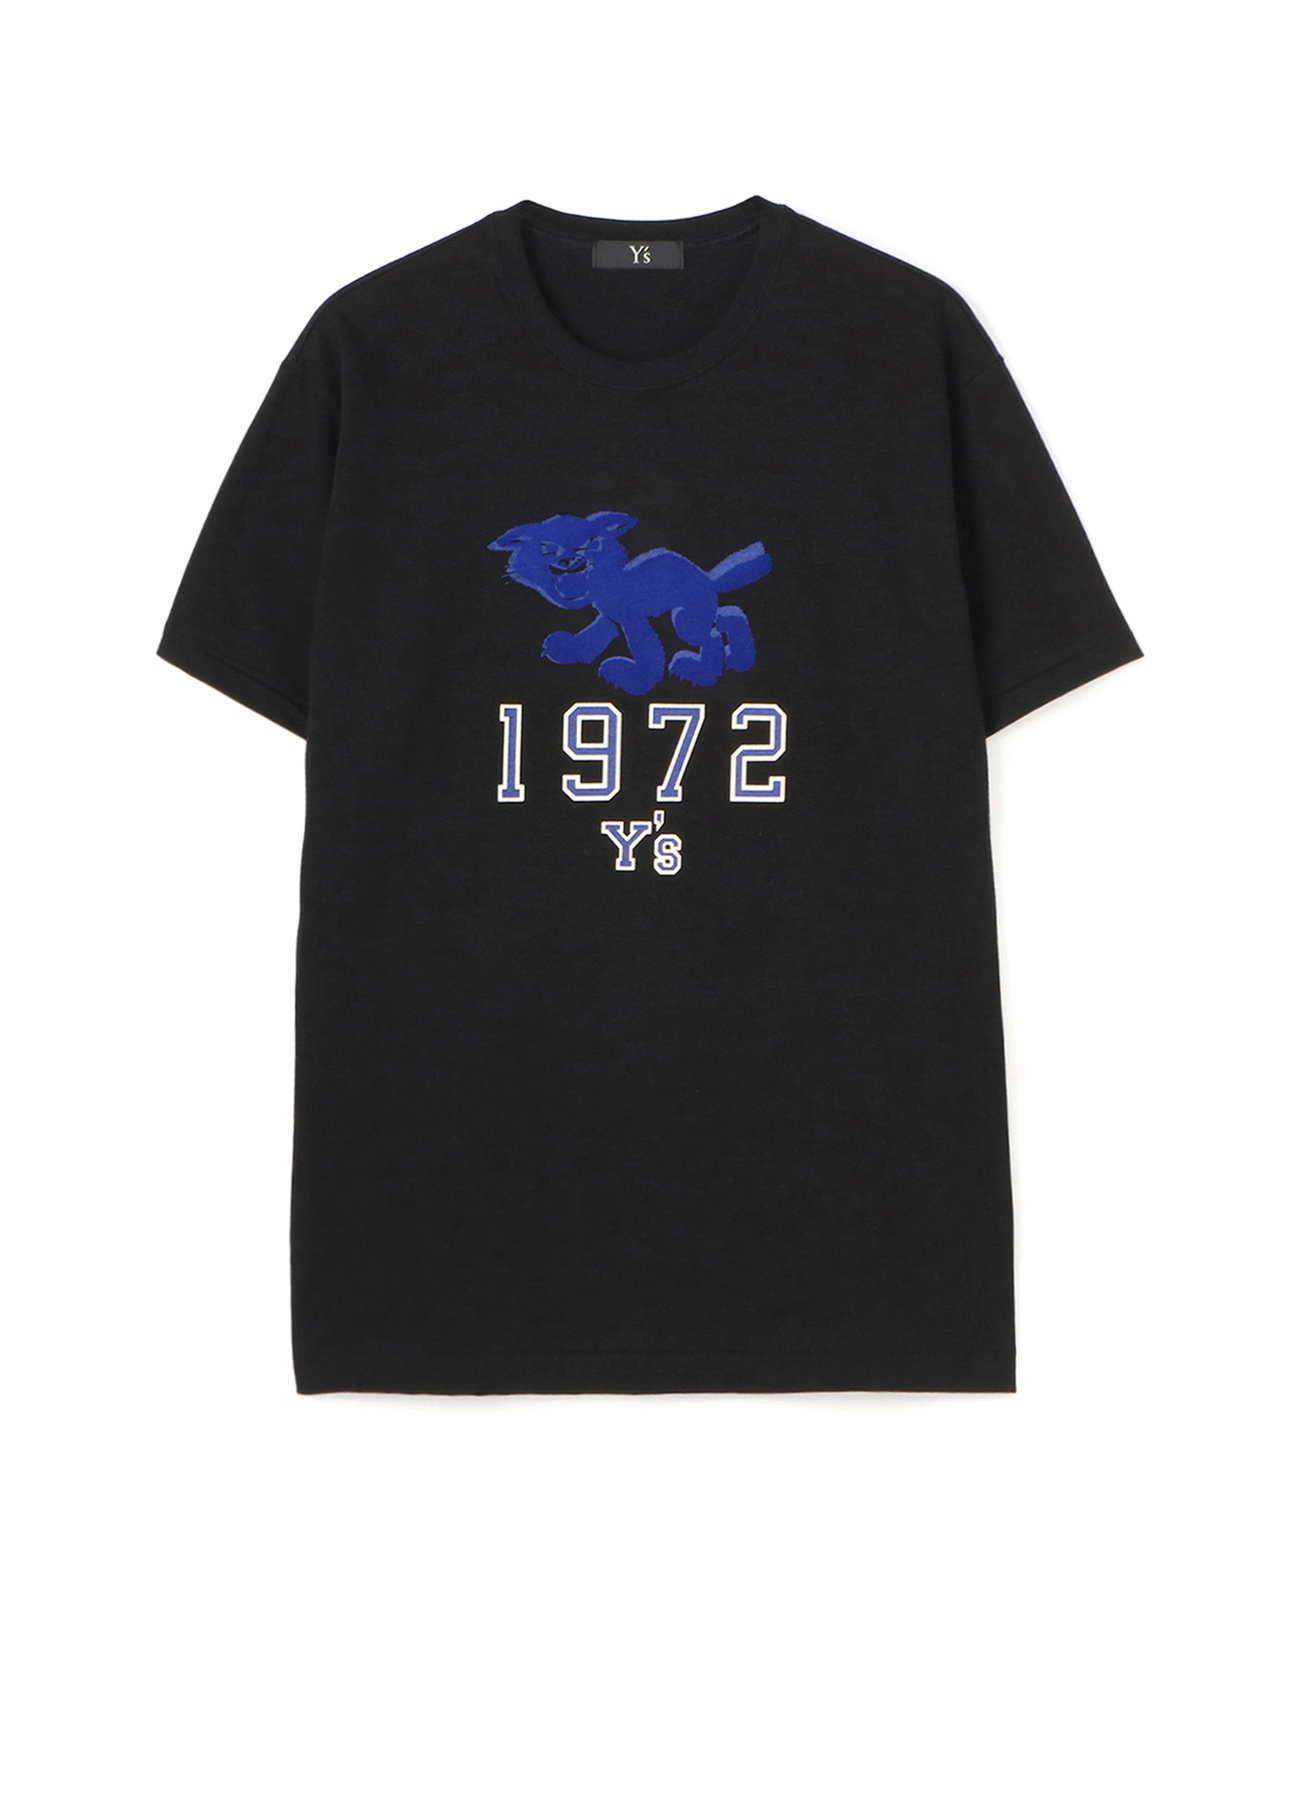 [Y's 1972 - Traditions] CAT PIGMENT PRINT SHORT SLEEVE T